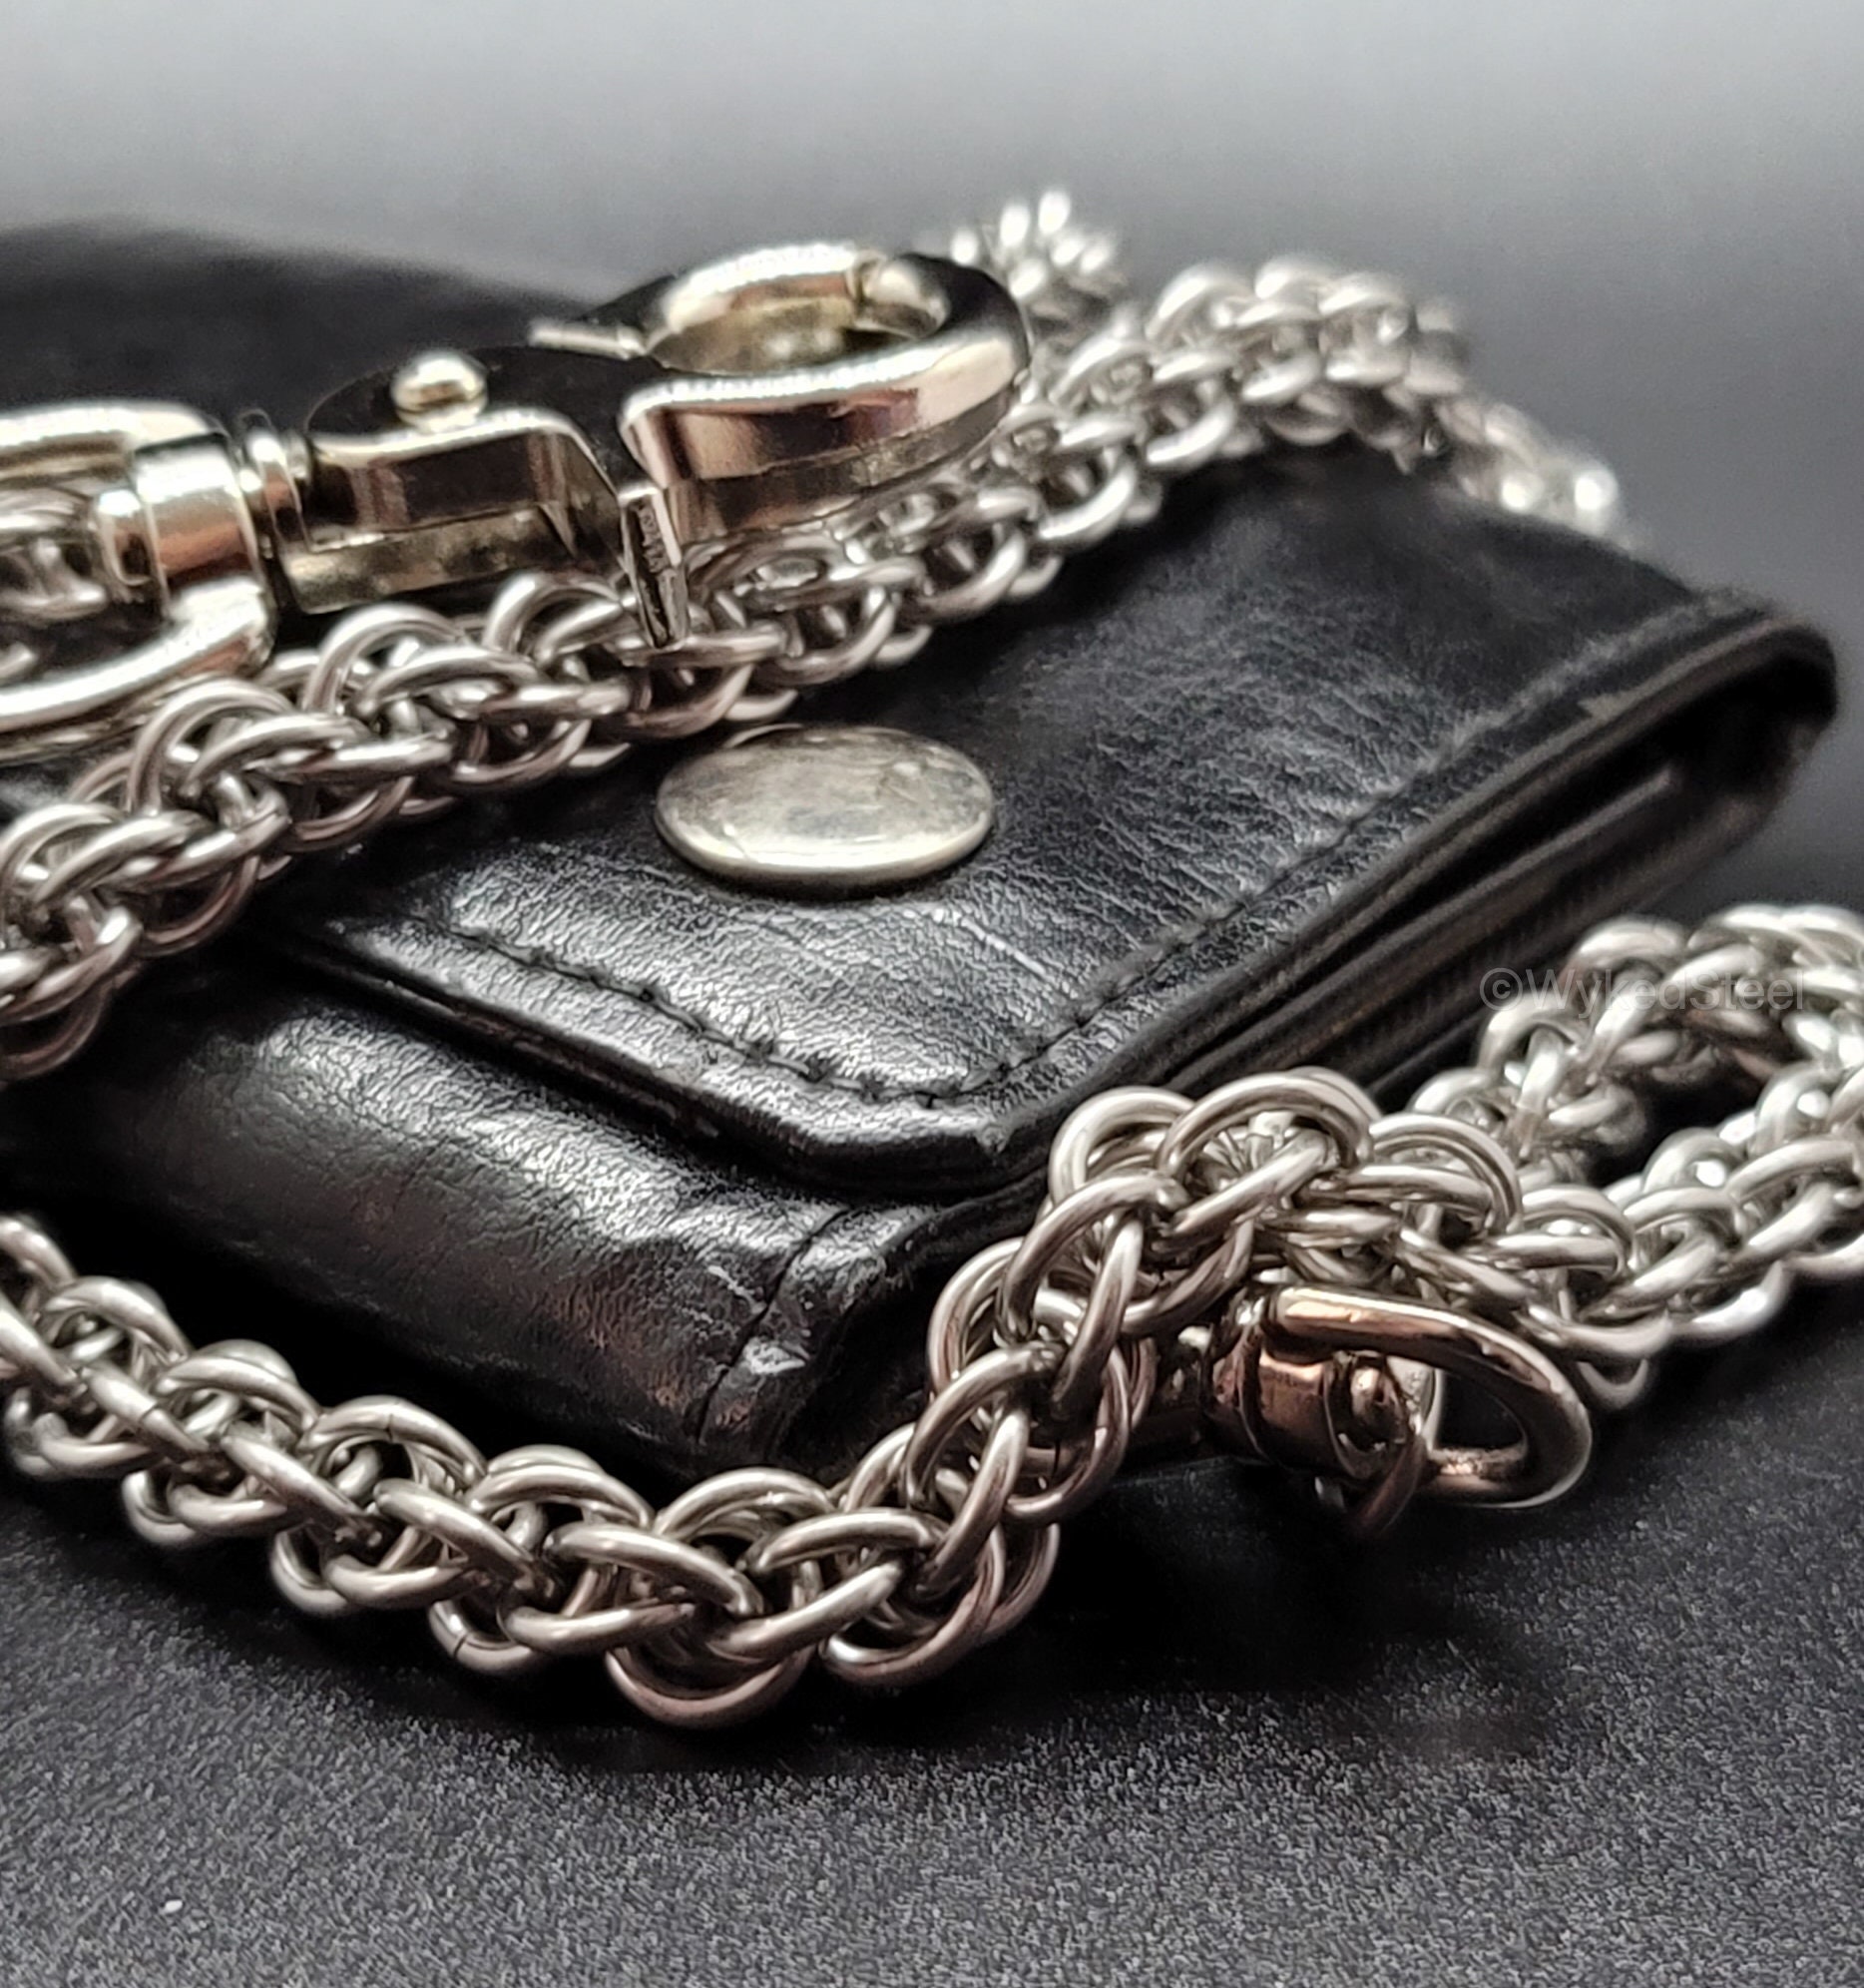 Skull Wallet Chain | Hellride - Galvanized Stainless | Sanity Jewelry 21 Inches